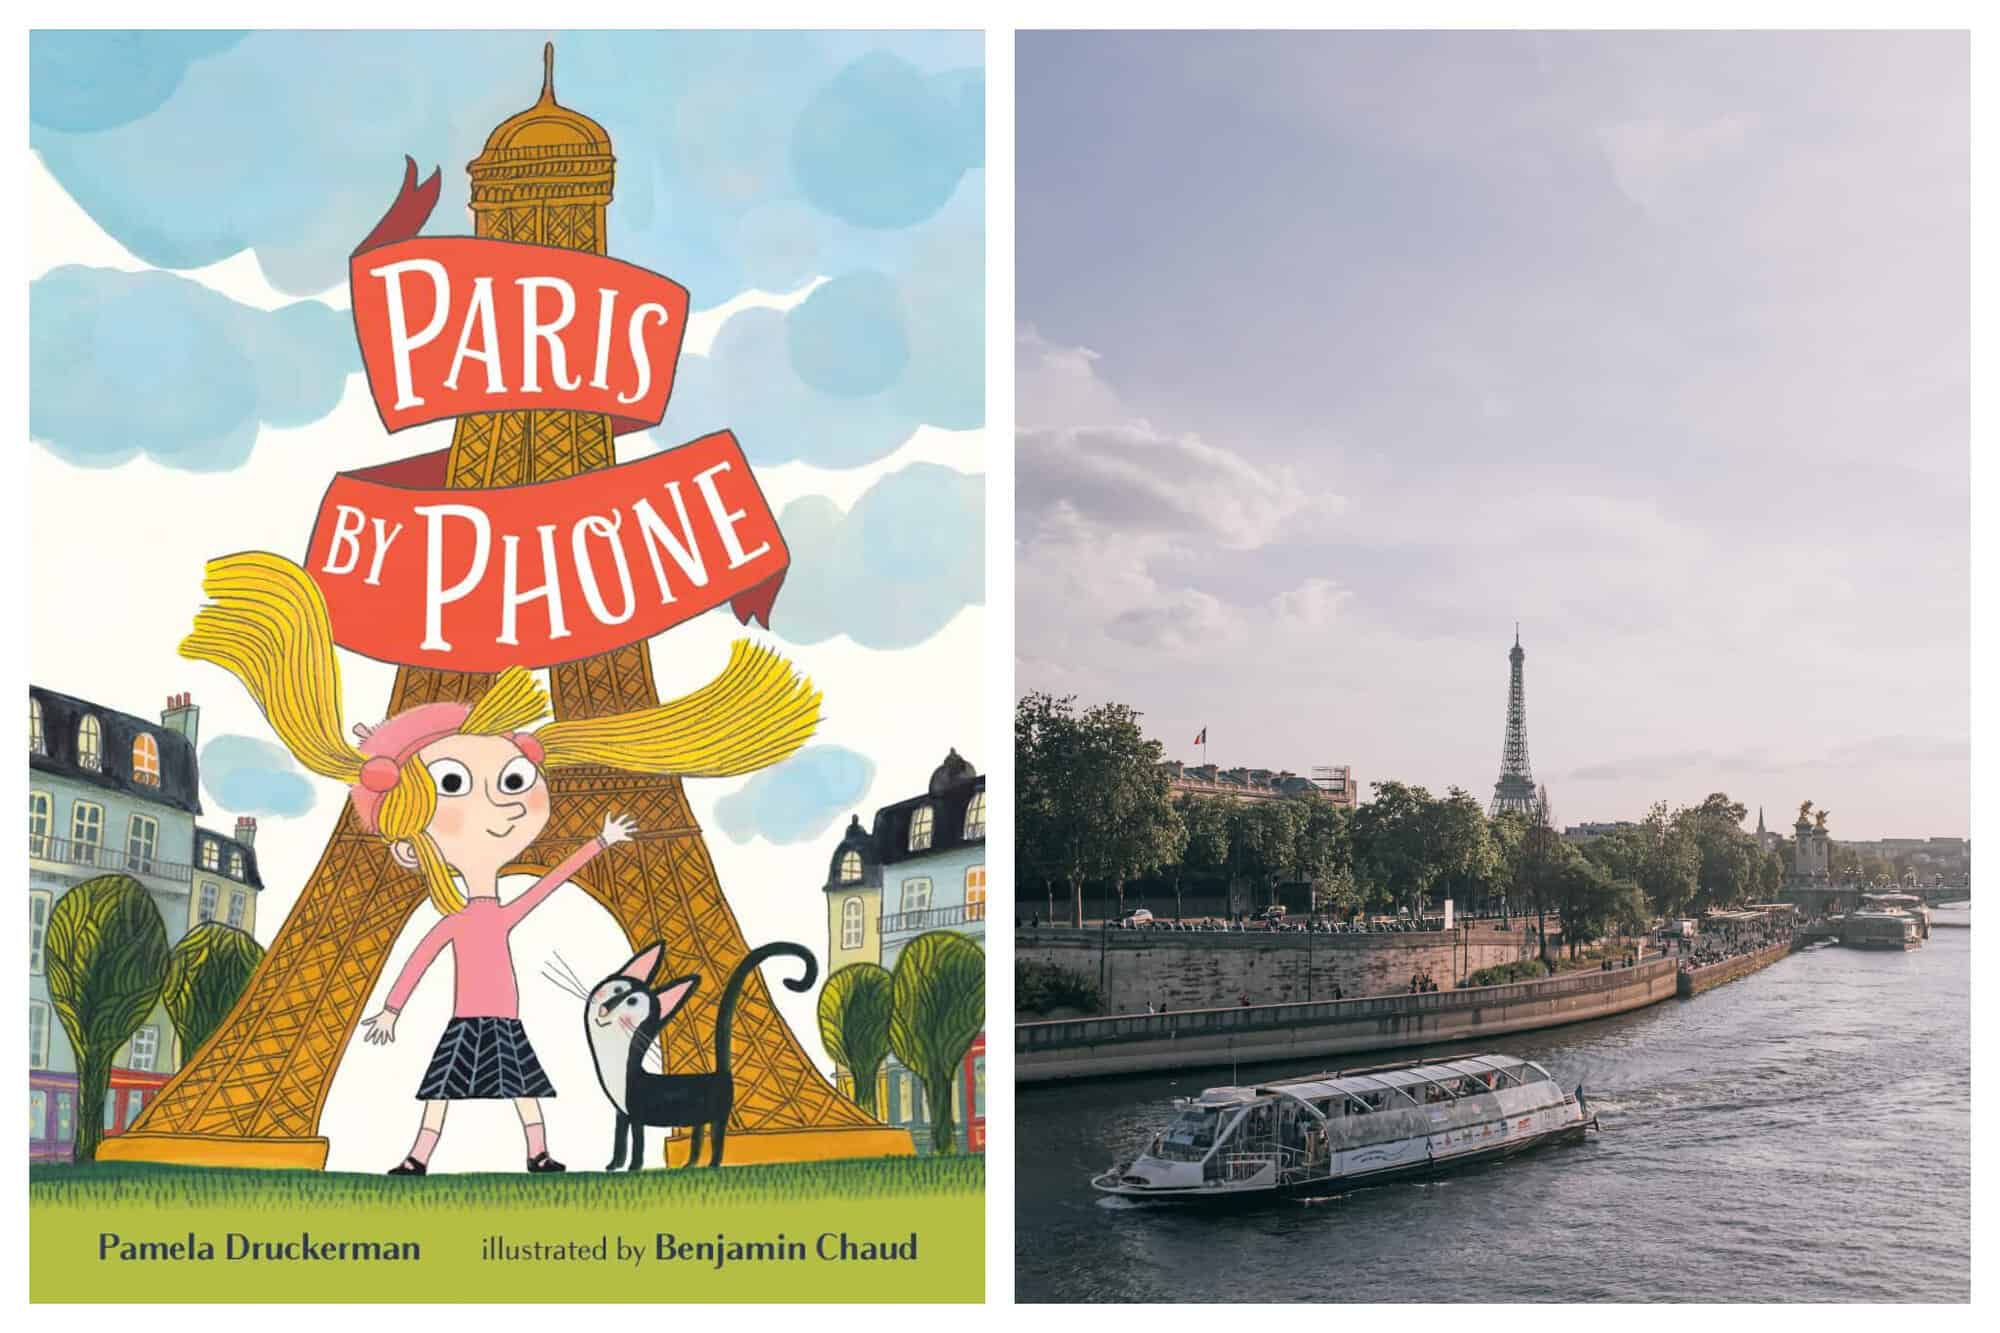 Left: The cover of the book Paris by Phone, written by Pamela Druckerman. Right: The Seine in Paris, with a boat driving by and the Eiffel Tower visible in the background. 